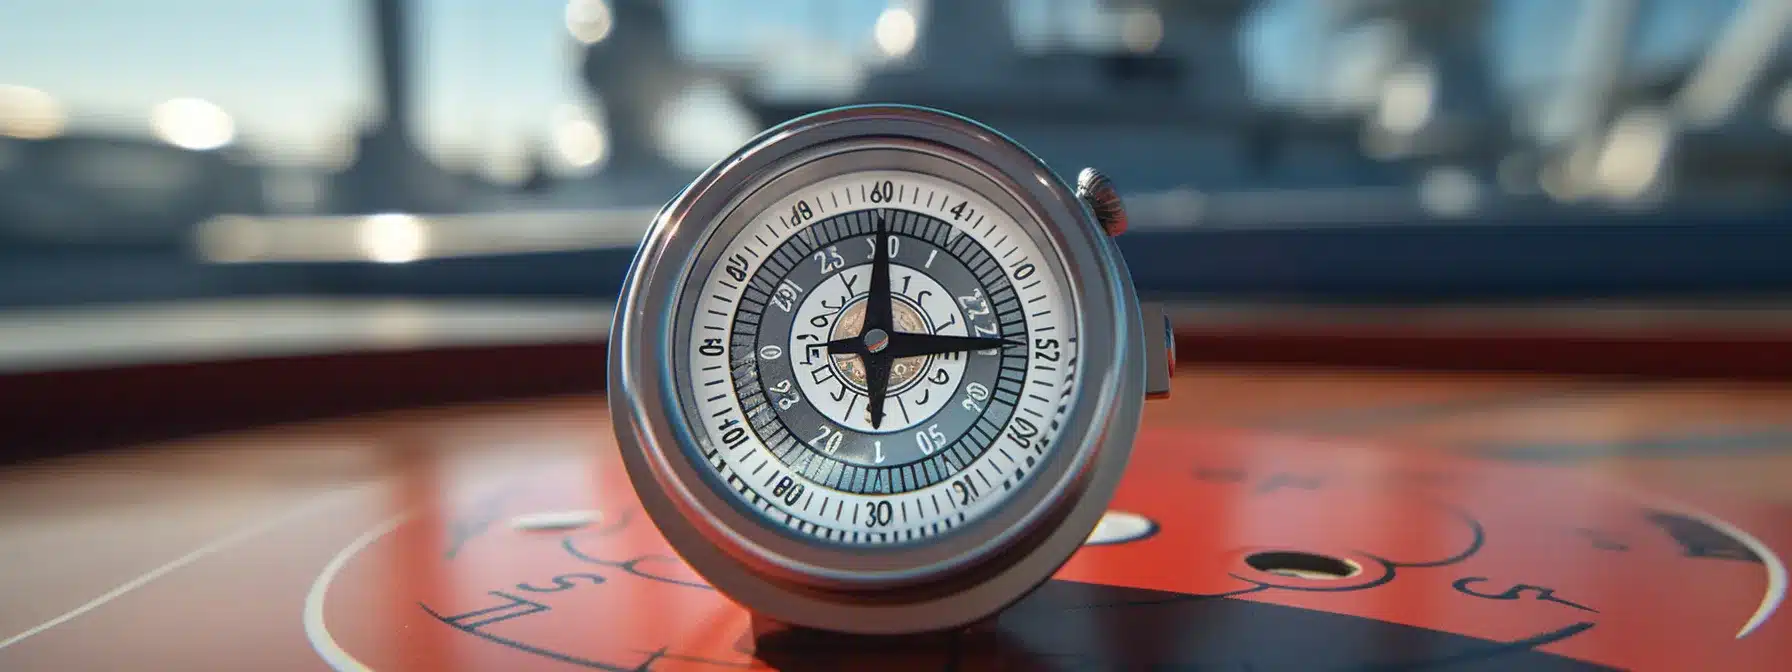 A Digital Compass Guiding A Ship Through A Changing And Challenging Digital Landscape.